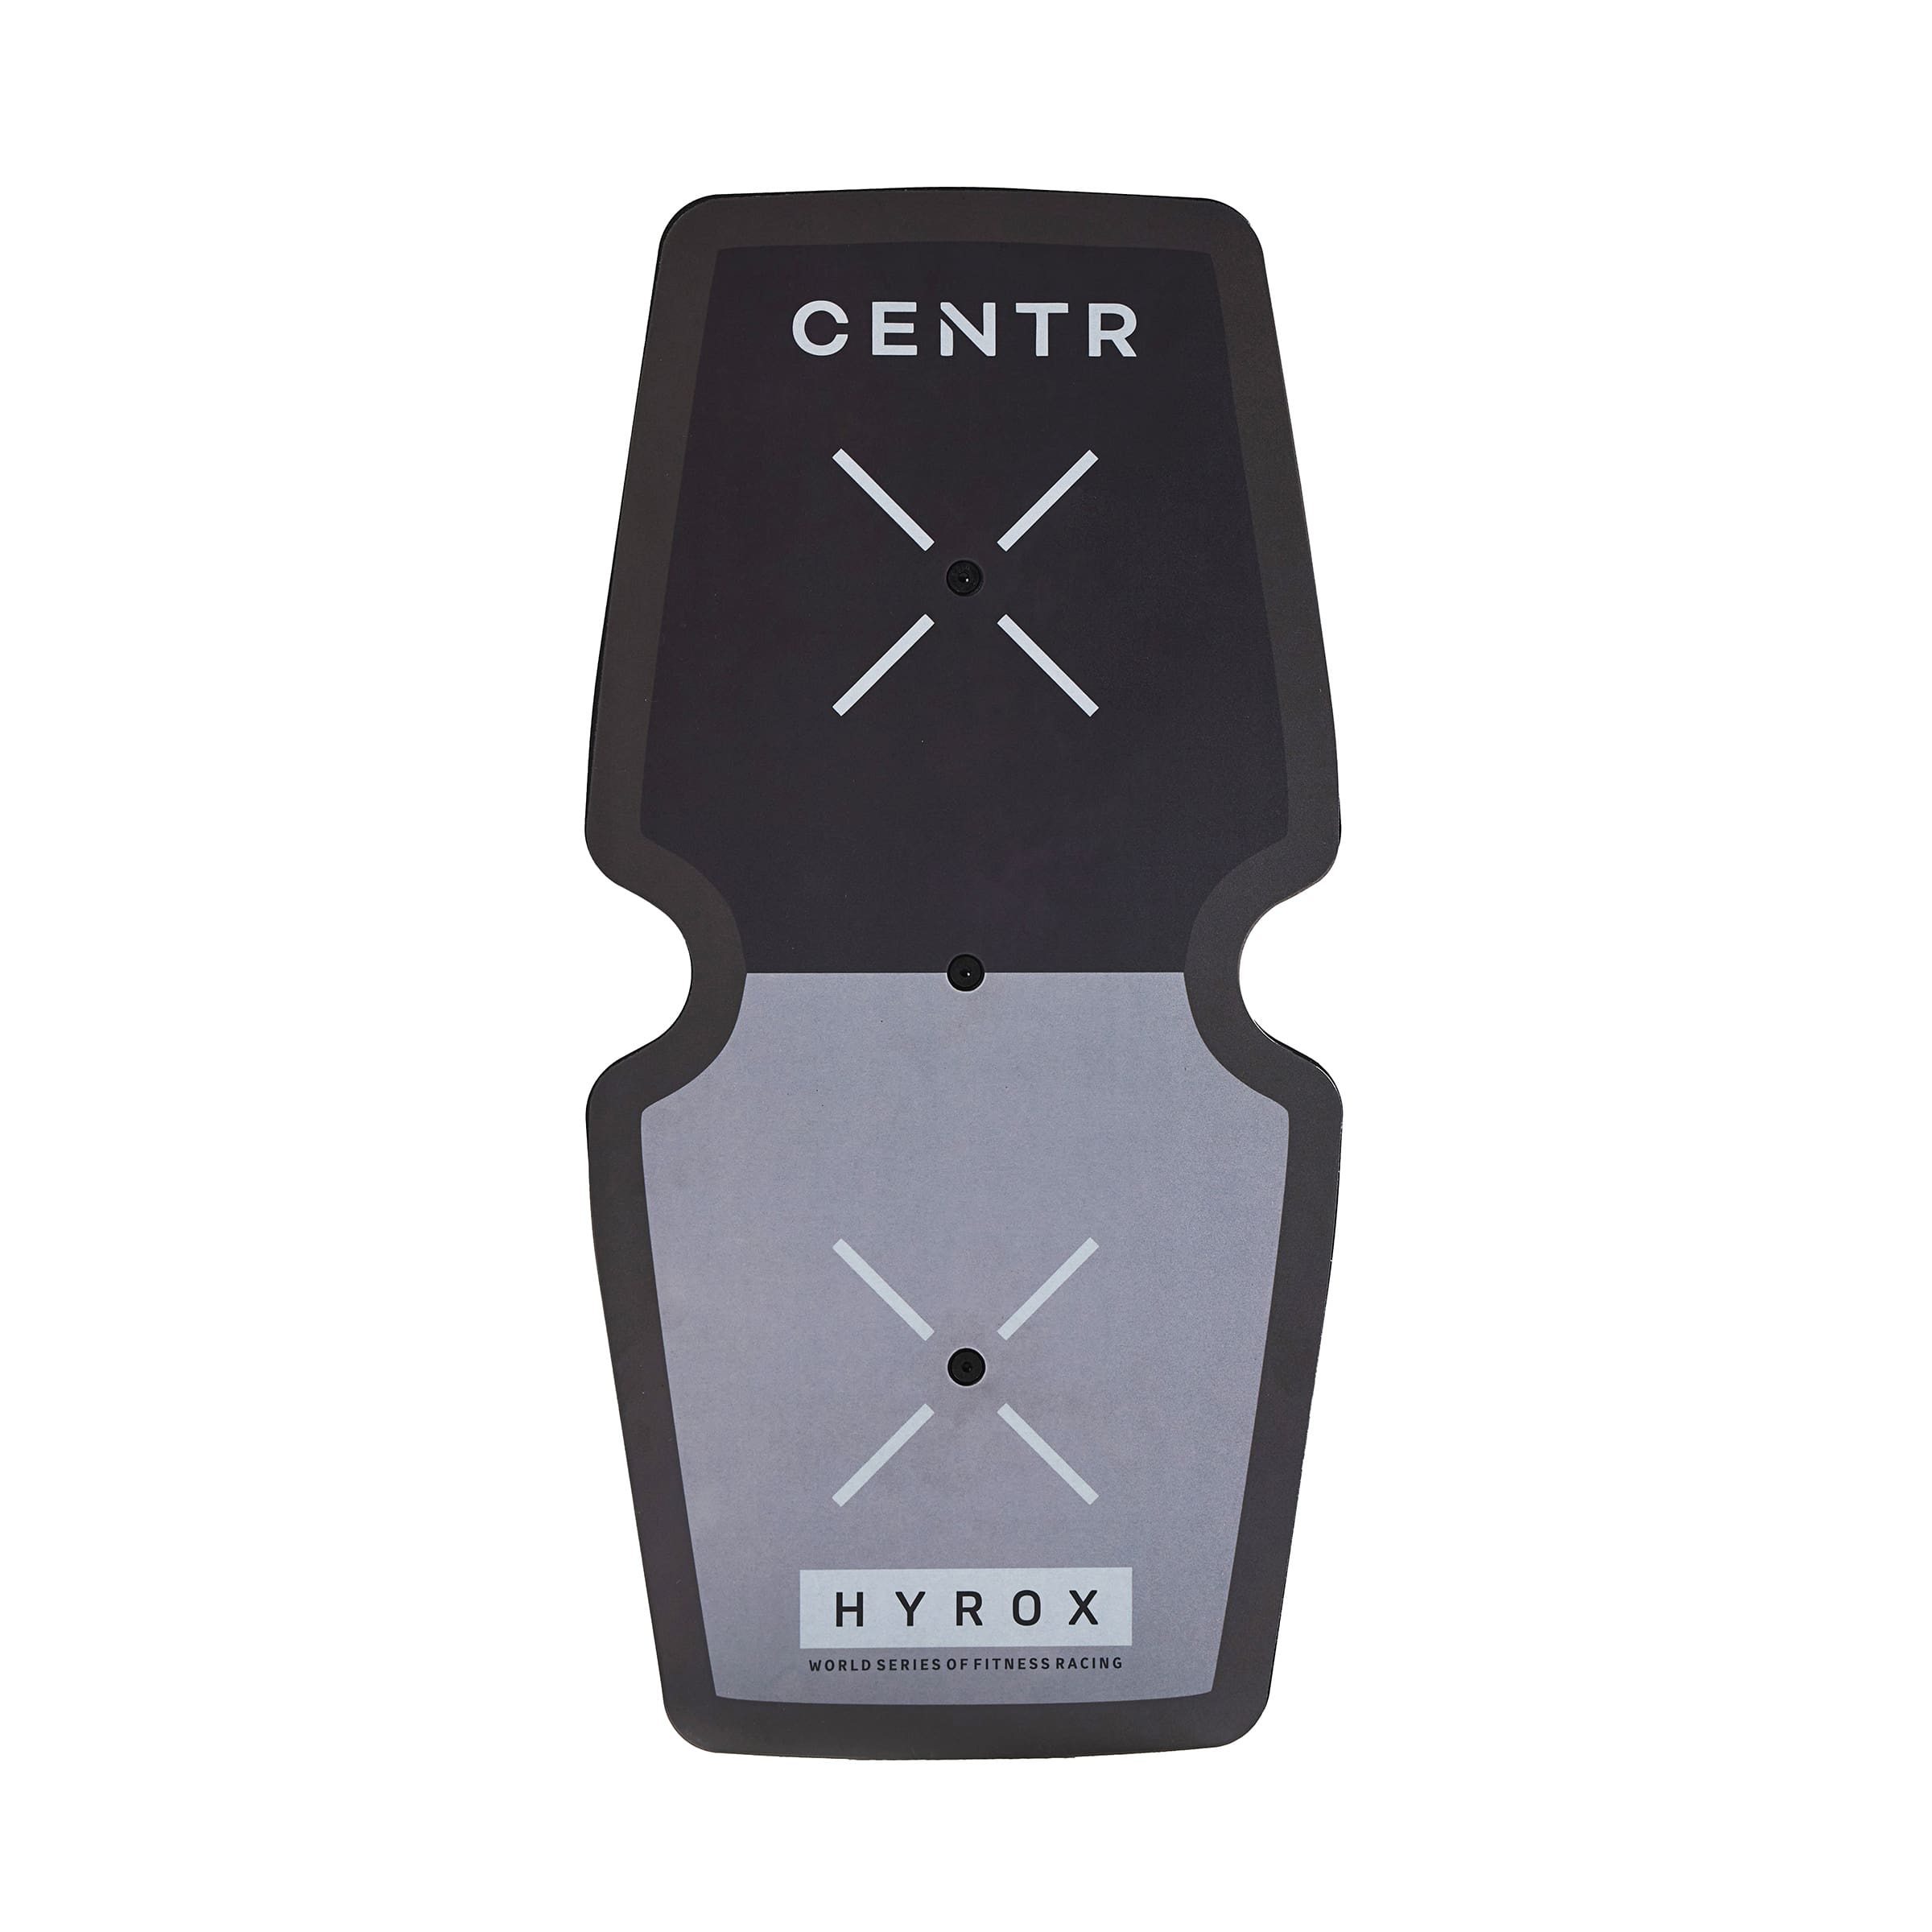 CENTR x HYROX Competition Rig Target